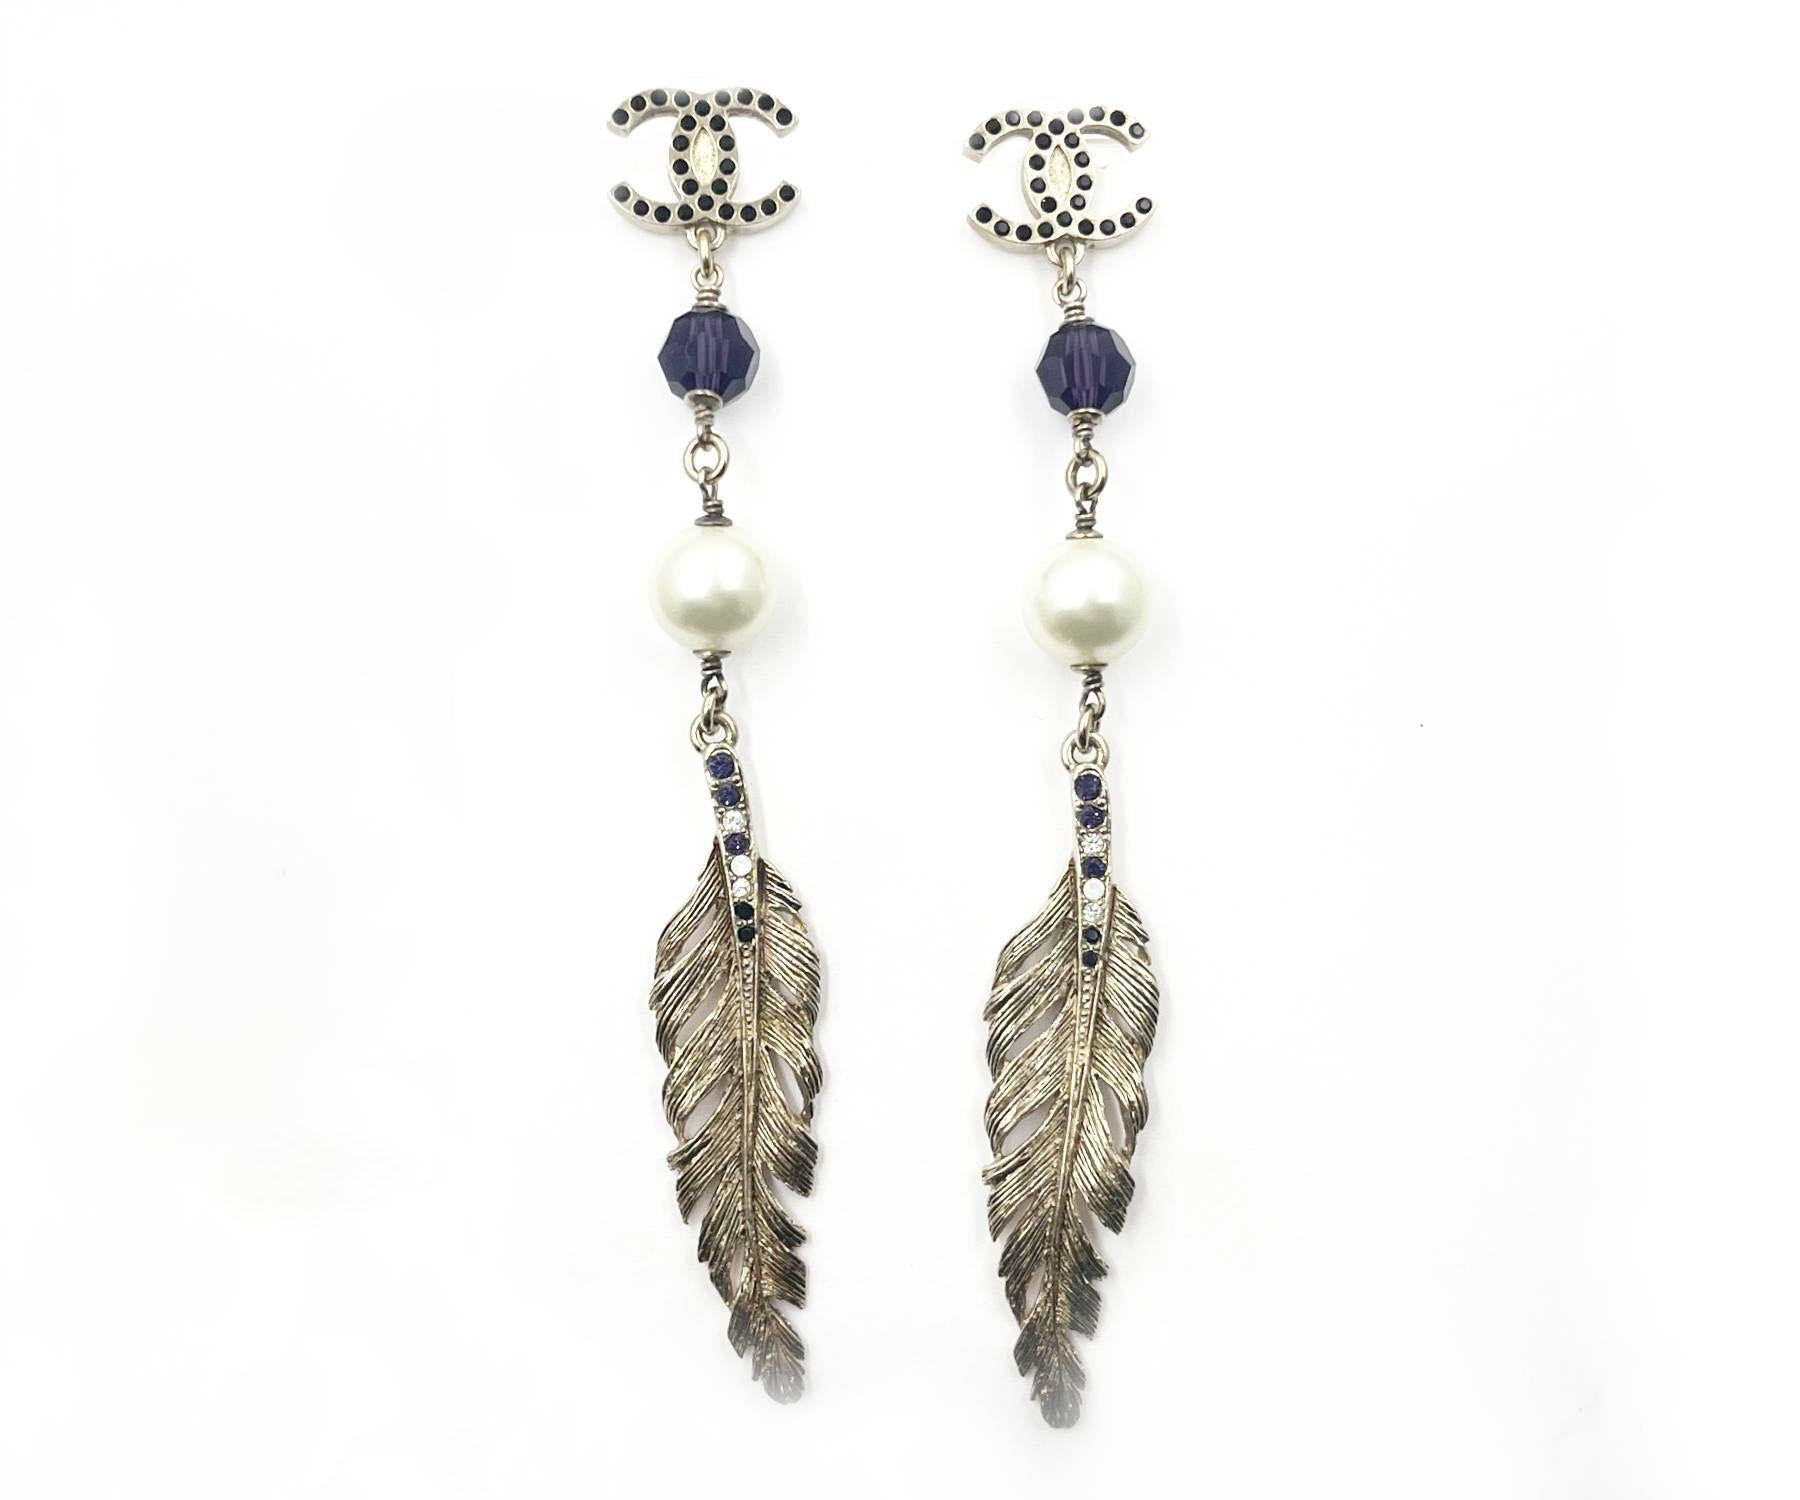 Chanel Silver CC Purple Crystal Pearl Feather Long Clip on Earrings

*Marked 08
*Made in France
*Comes with the original box

-It is approximately 4.25